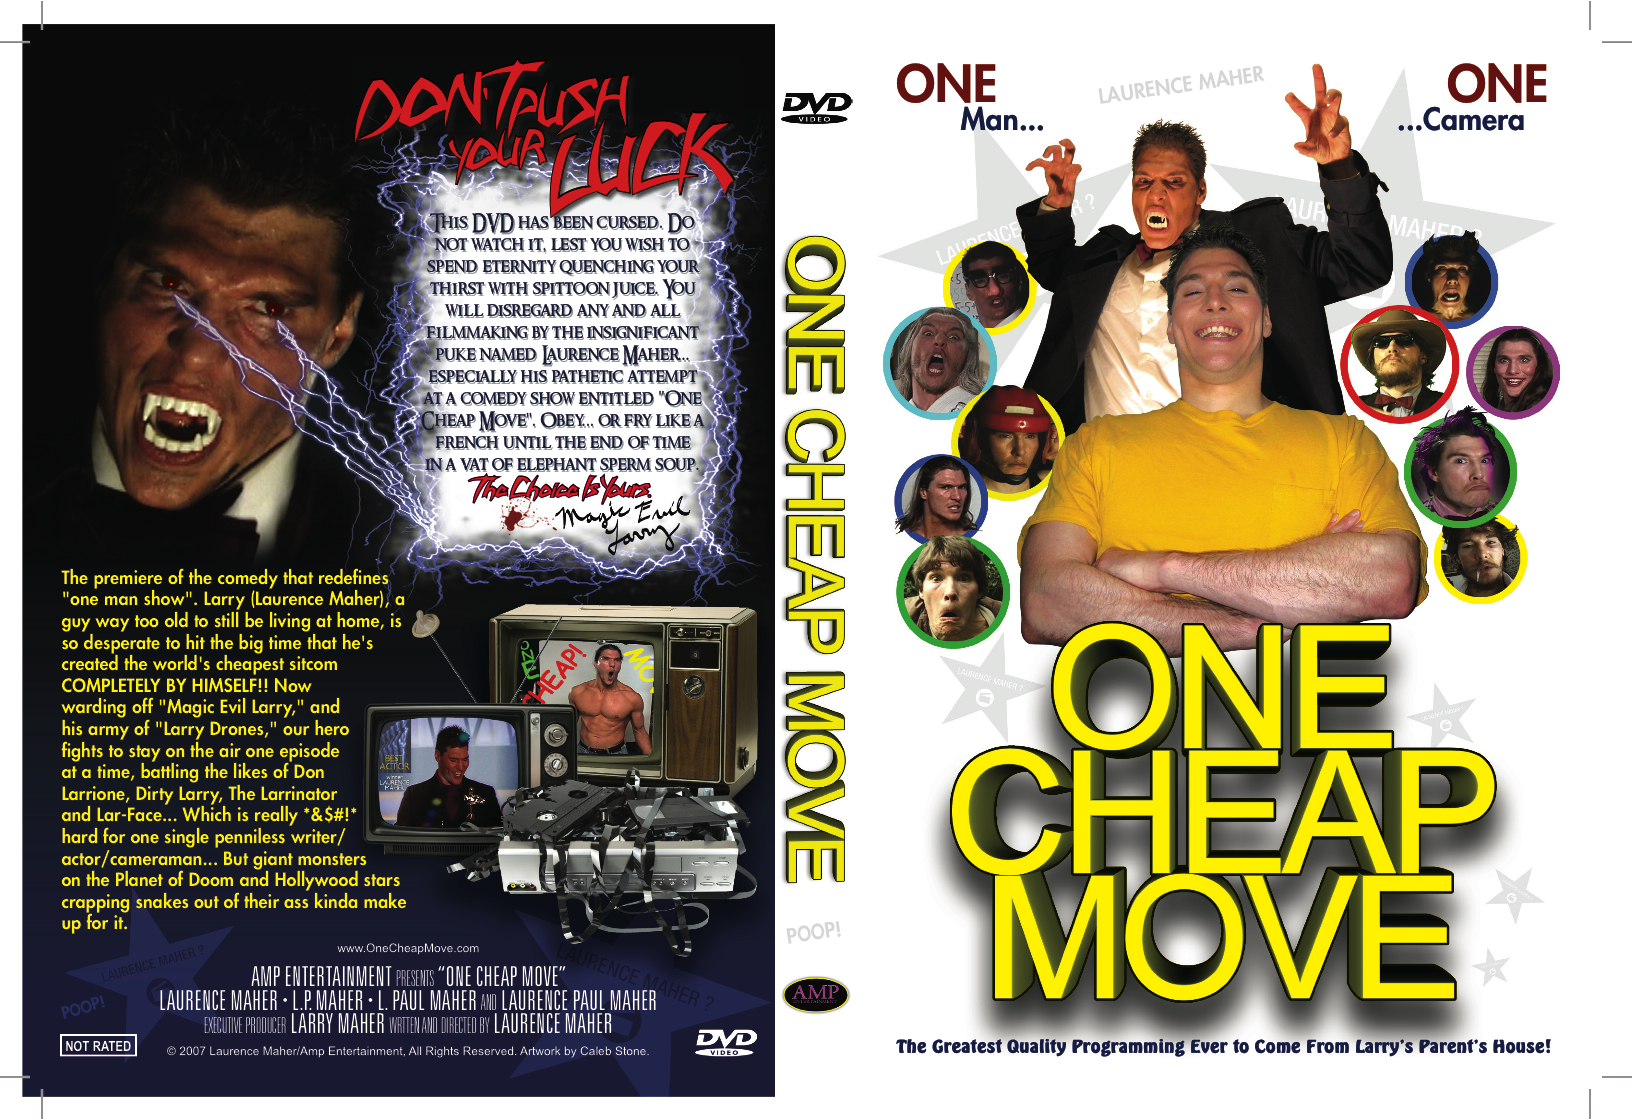 Poster release art for the Laurence Maher one-man comedy show ONE CHEAP MOVE